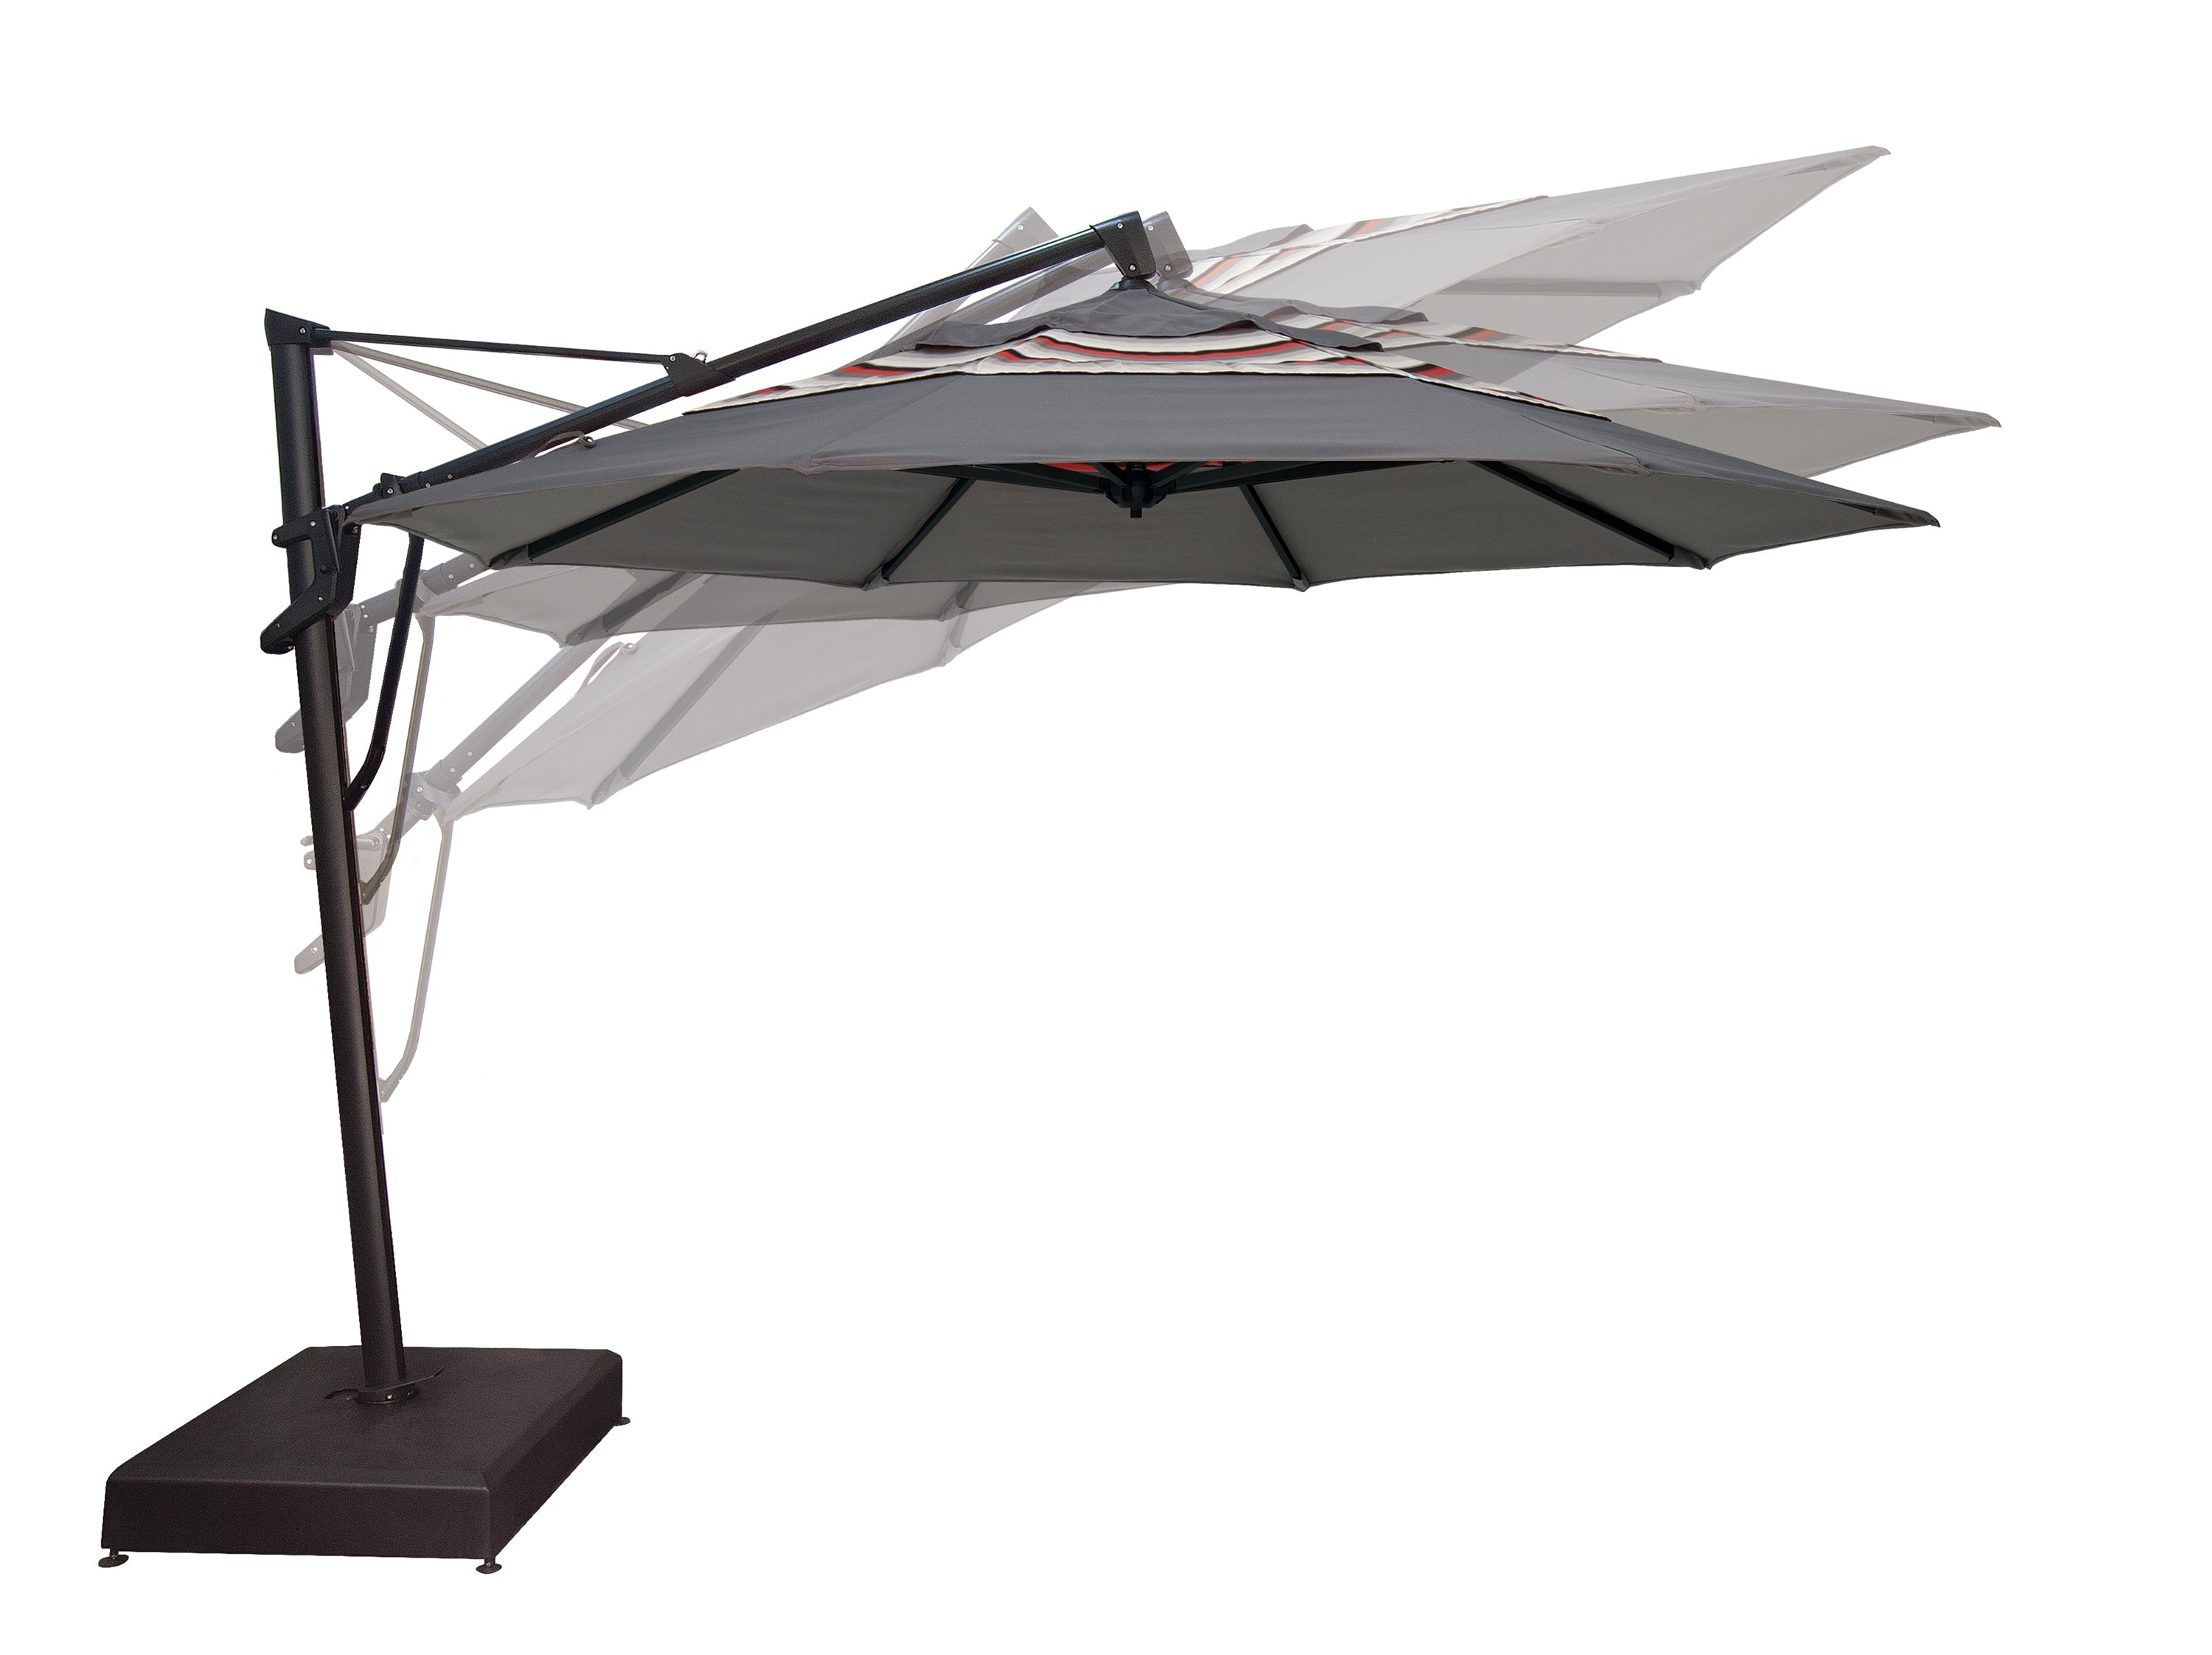 11' Oct Cantilever - Plus Umbrella Frame Only